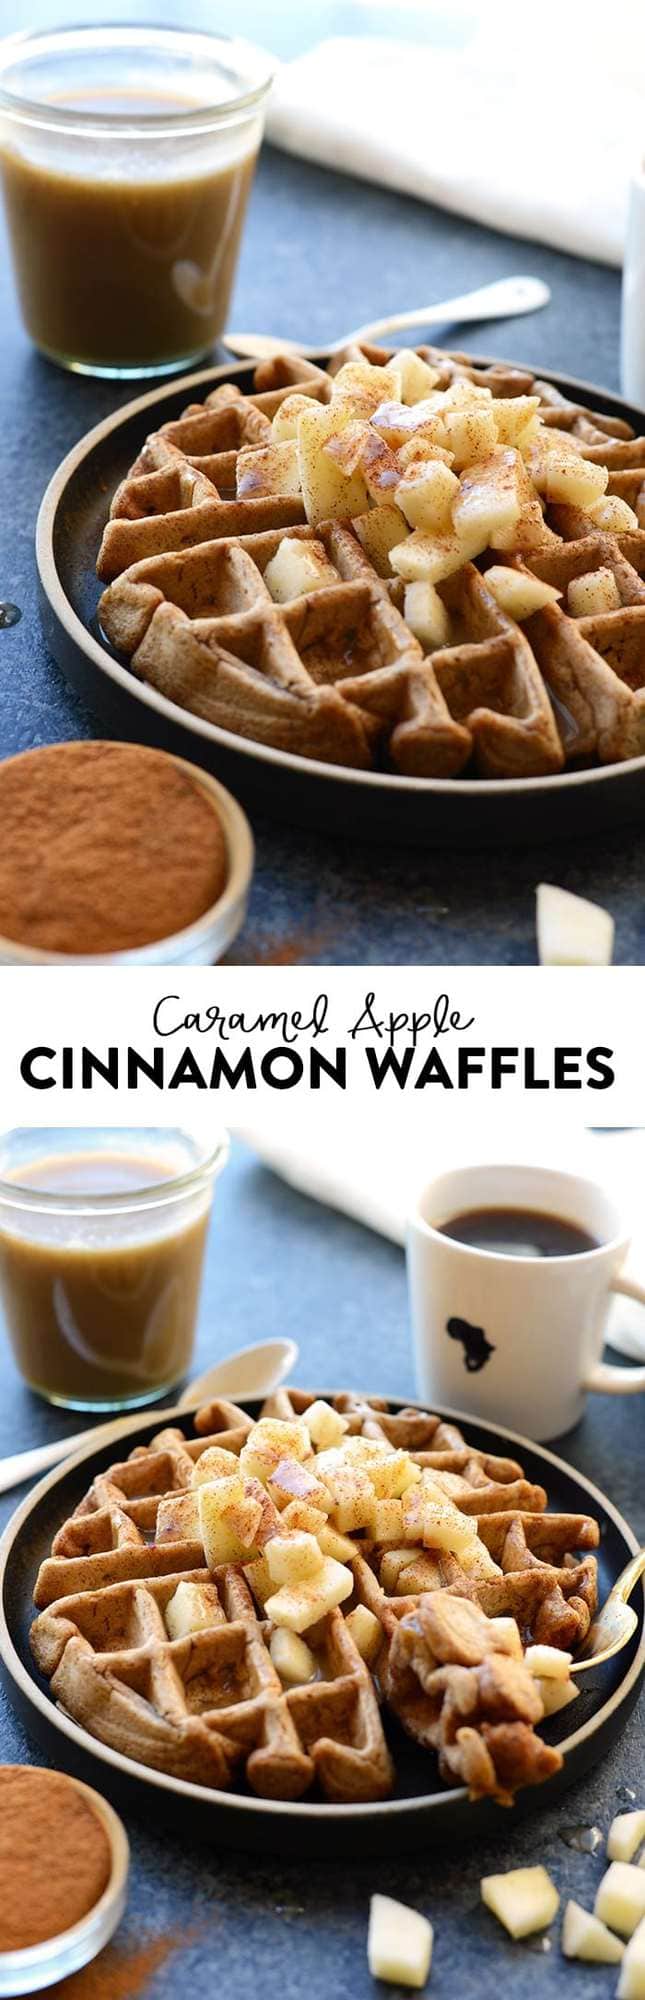 Tis the season of apples and cinnamon! You're going to love these HEALTHY caramel apple cinnamon waffles made with 100% whole wheat flour, apple chunks, tons of cinnamon, and a homemade caramel sauce made from full-fat coconut oil!